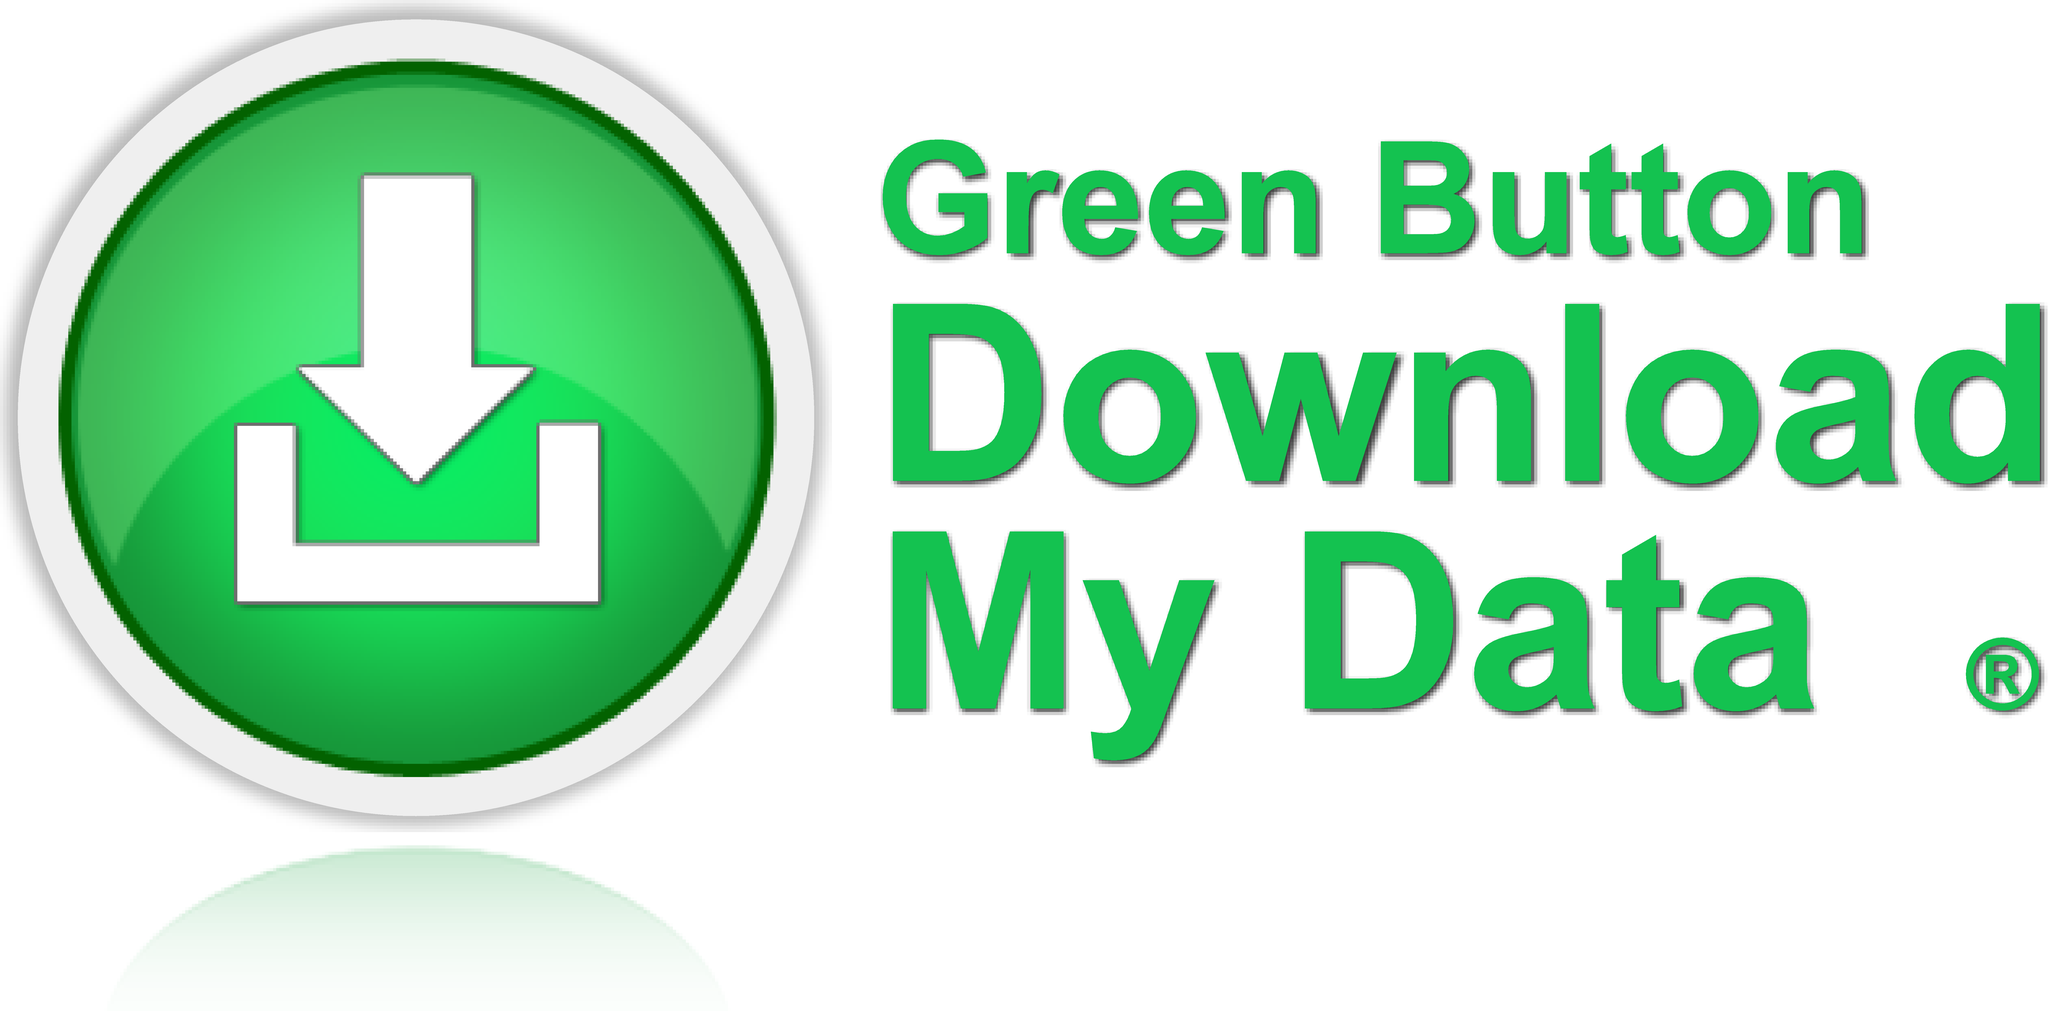 Green Button download my data through your Toronto Hydro online account